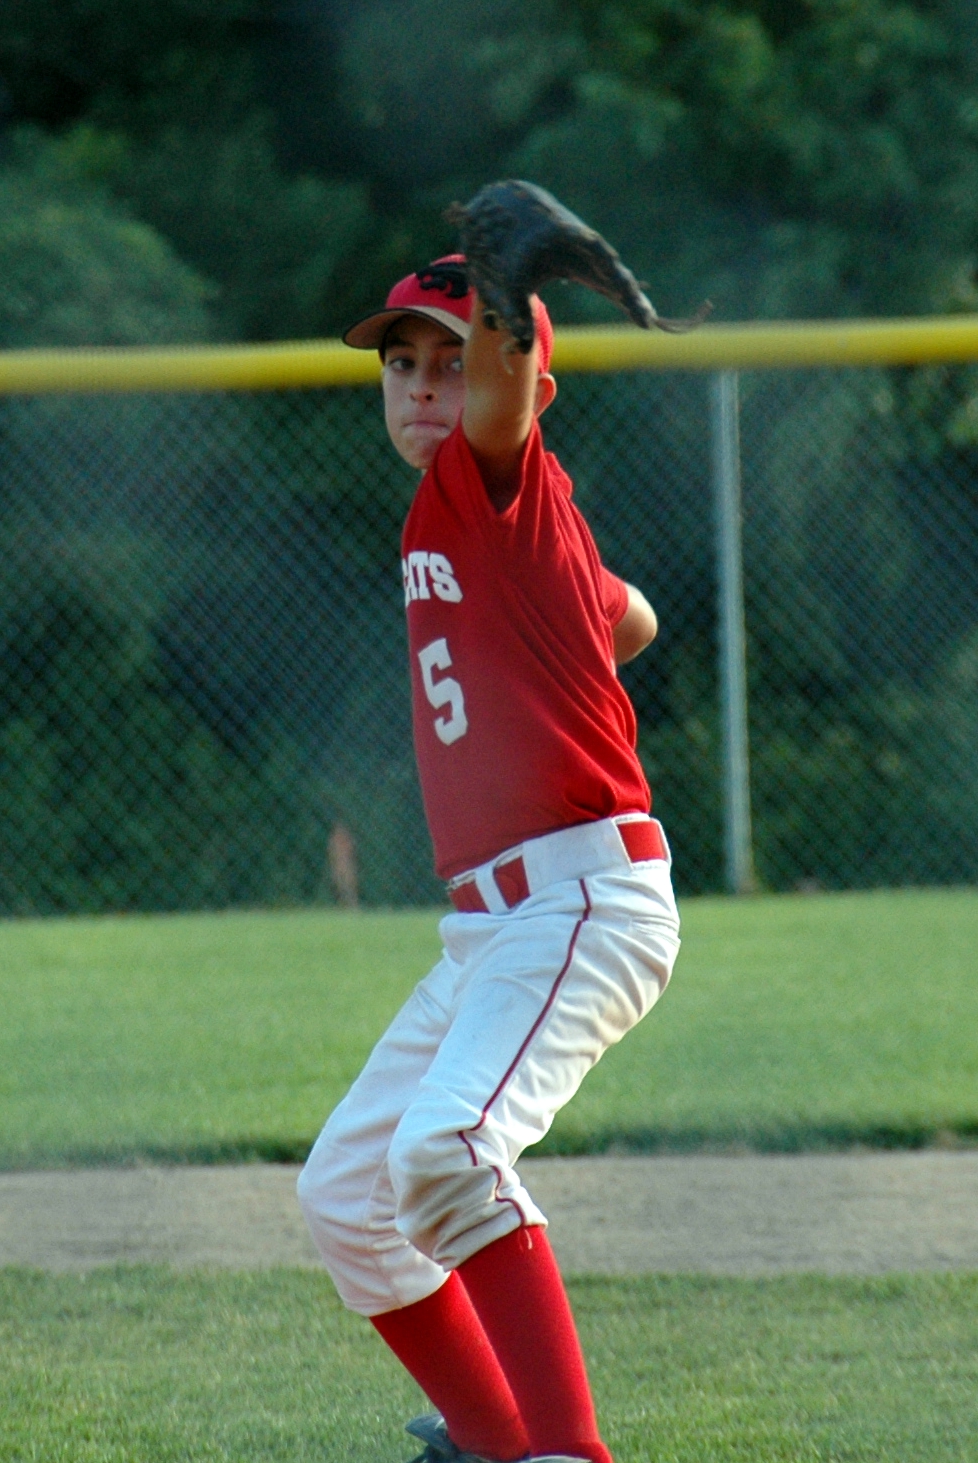 a  in a baseball uniform is catching a ball